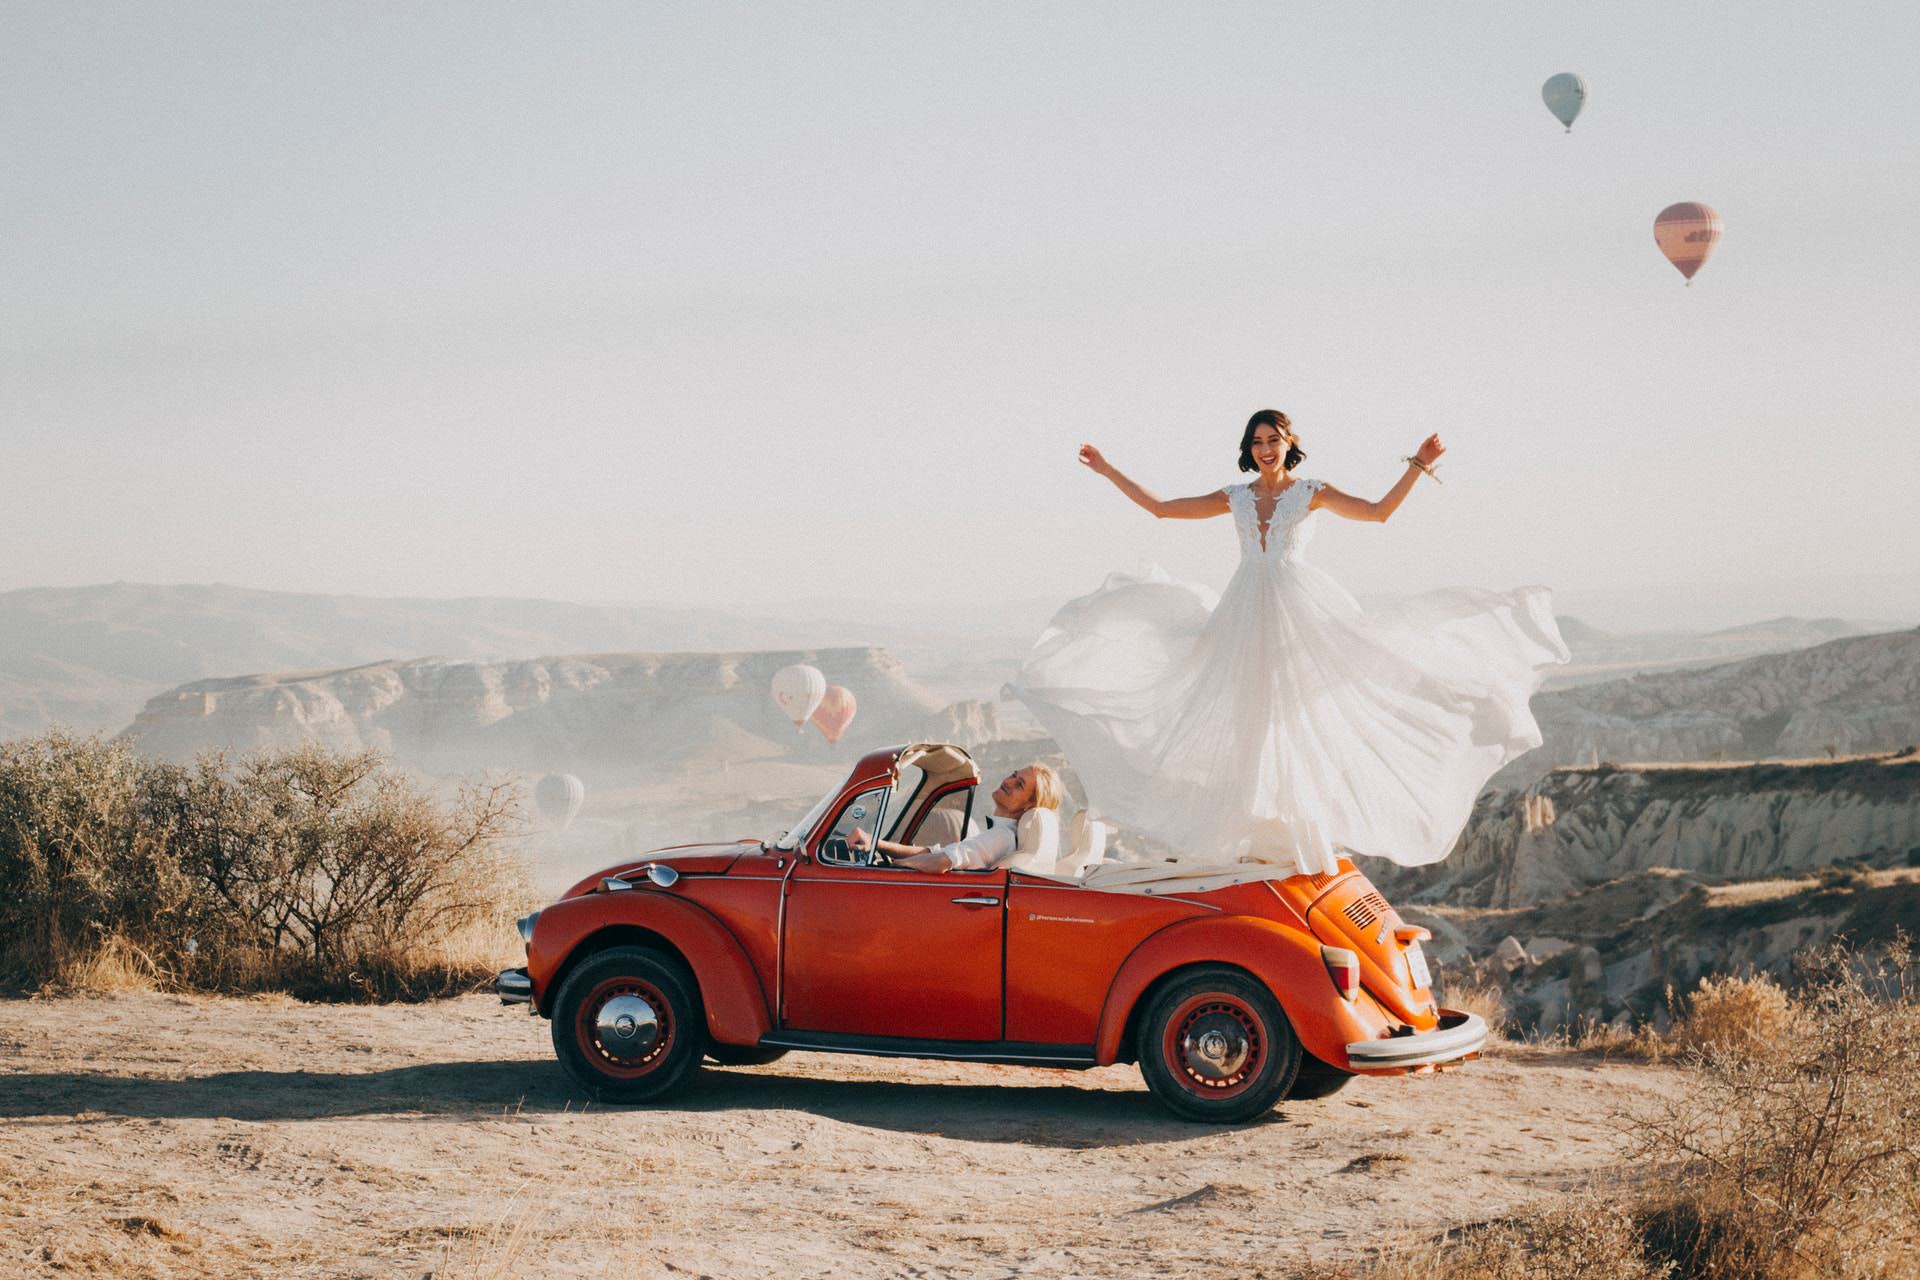 groom sitting in car while bride is standing on the car